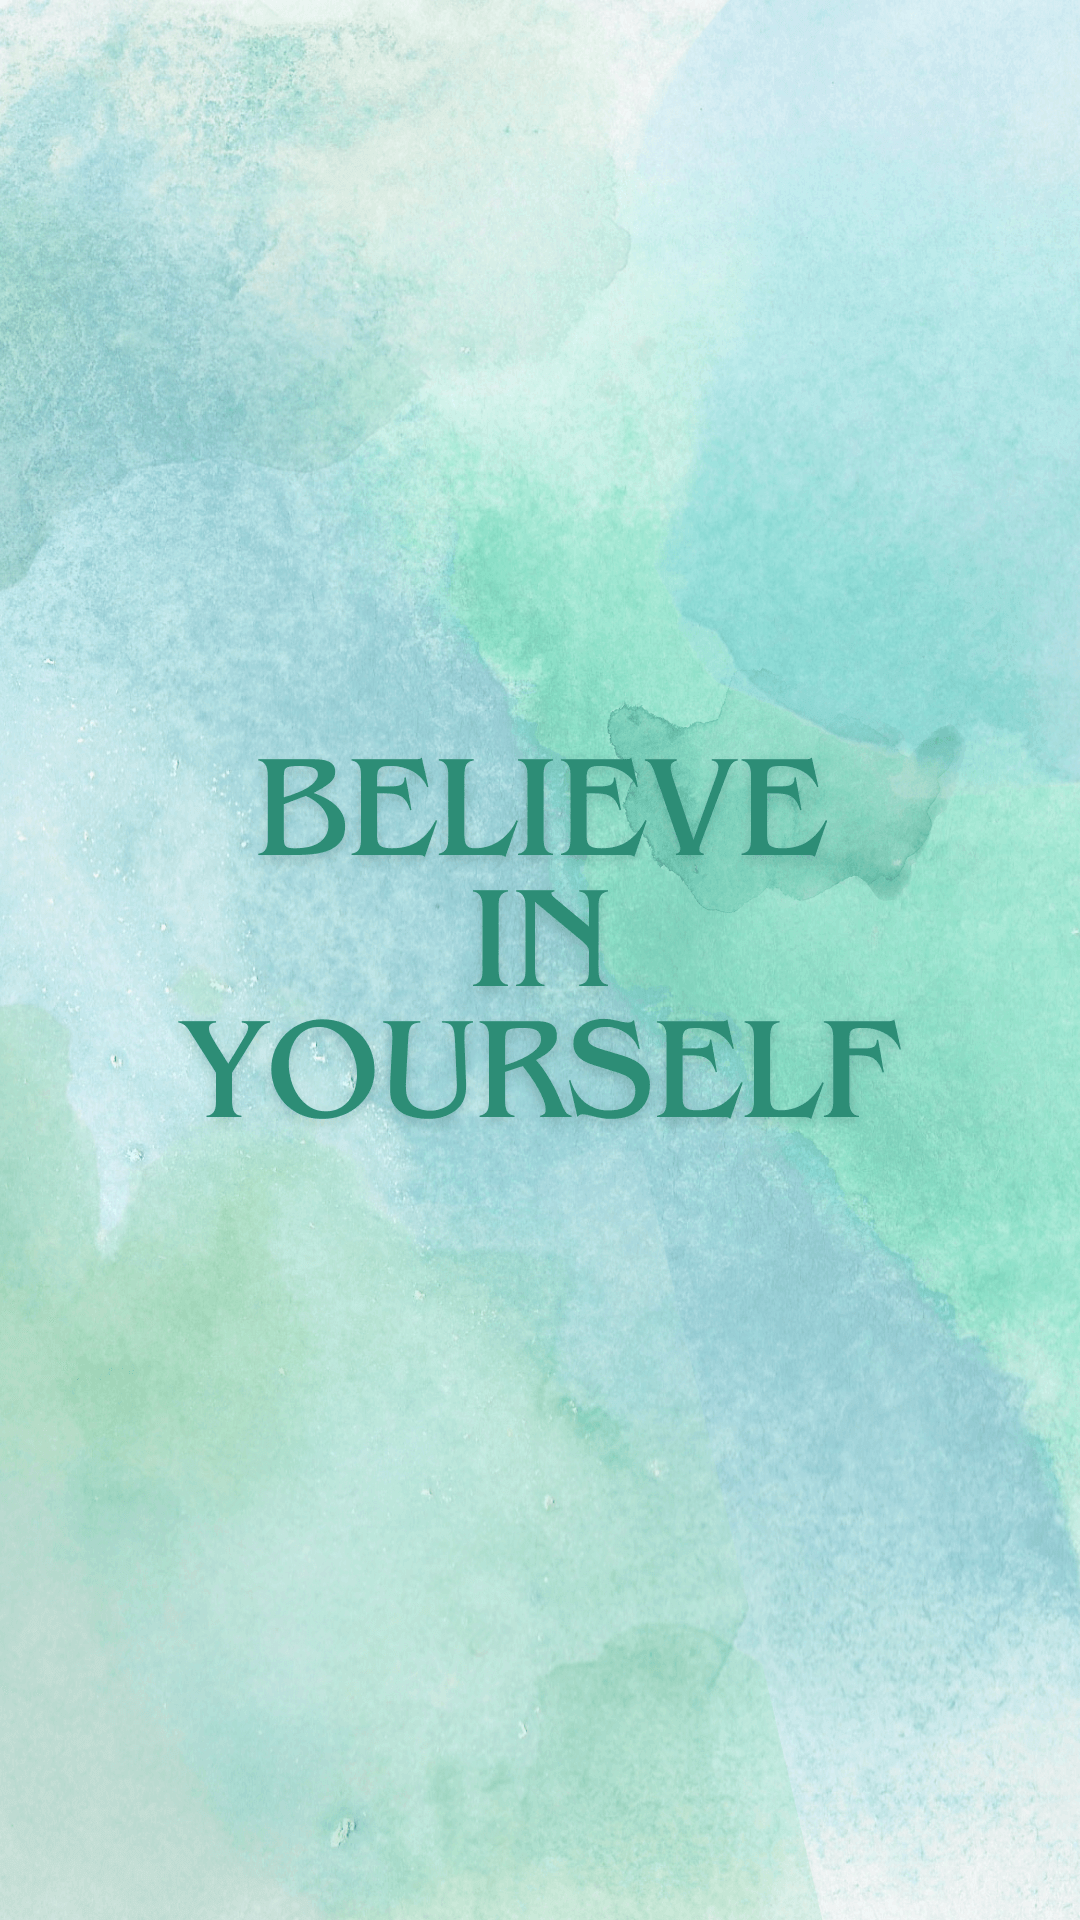 Believe in Yourself motivational saying on iPhone wallpaper background